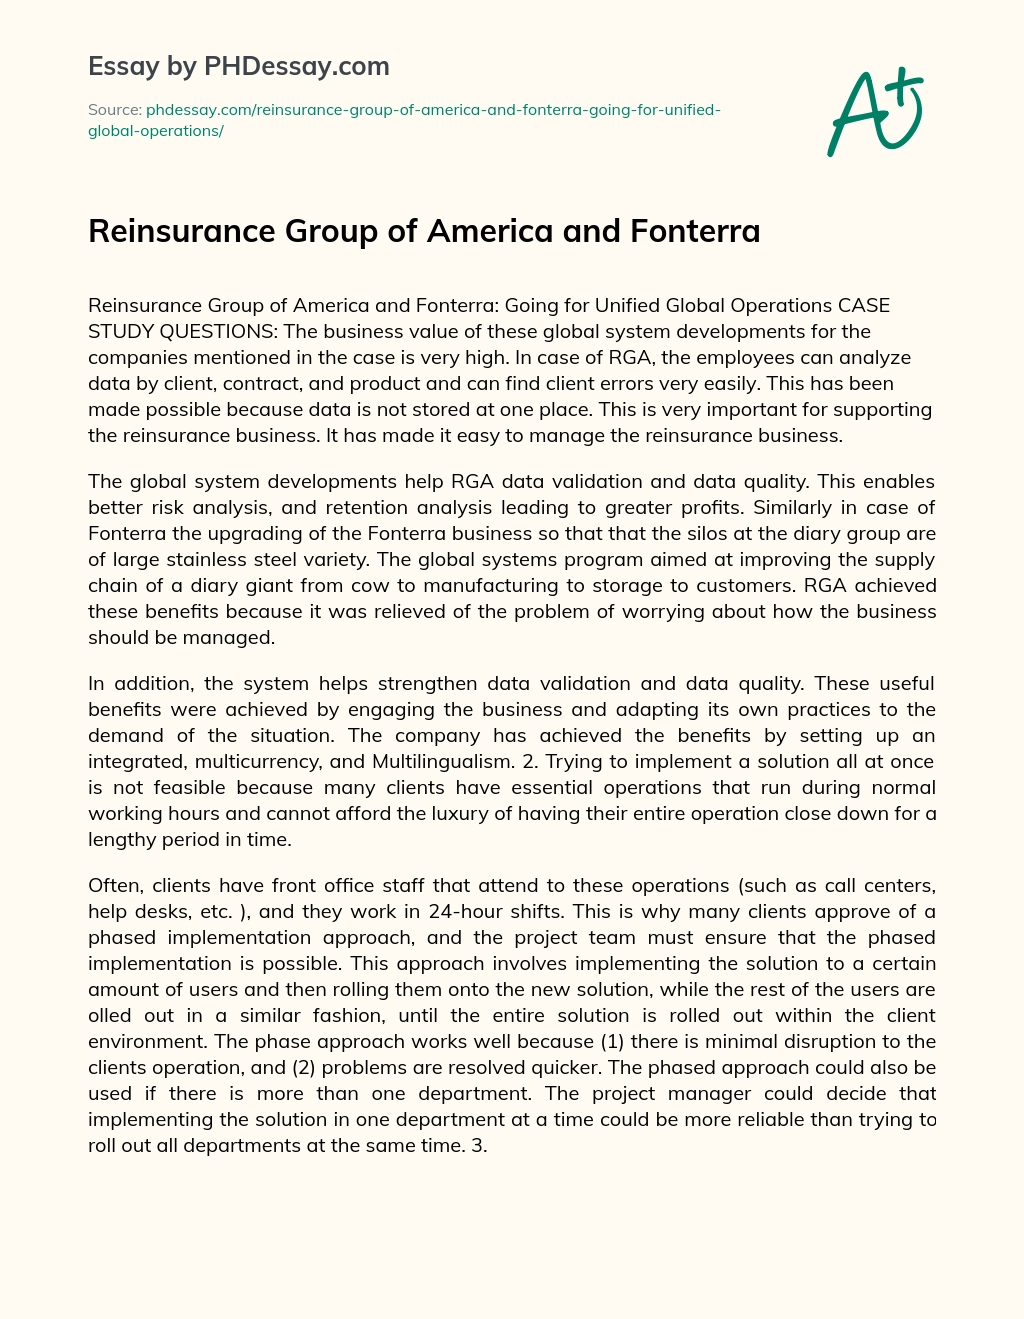 Reinsurance Group of America and Fonterra essay